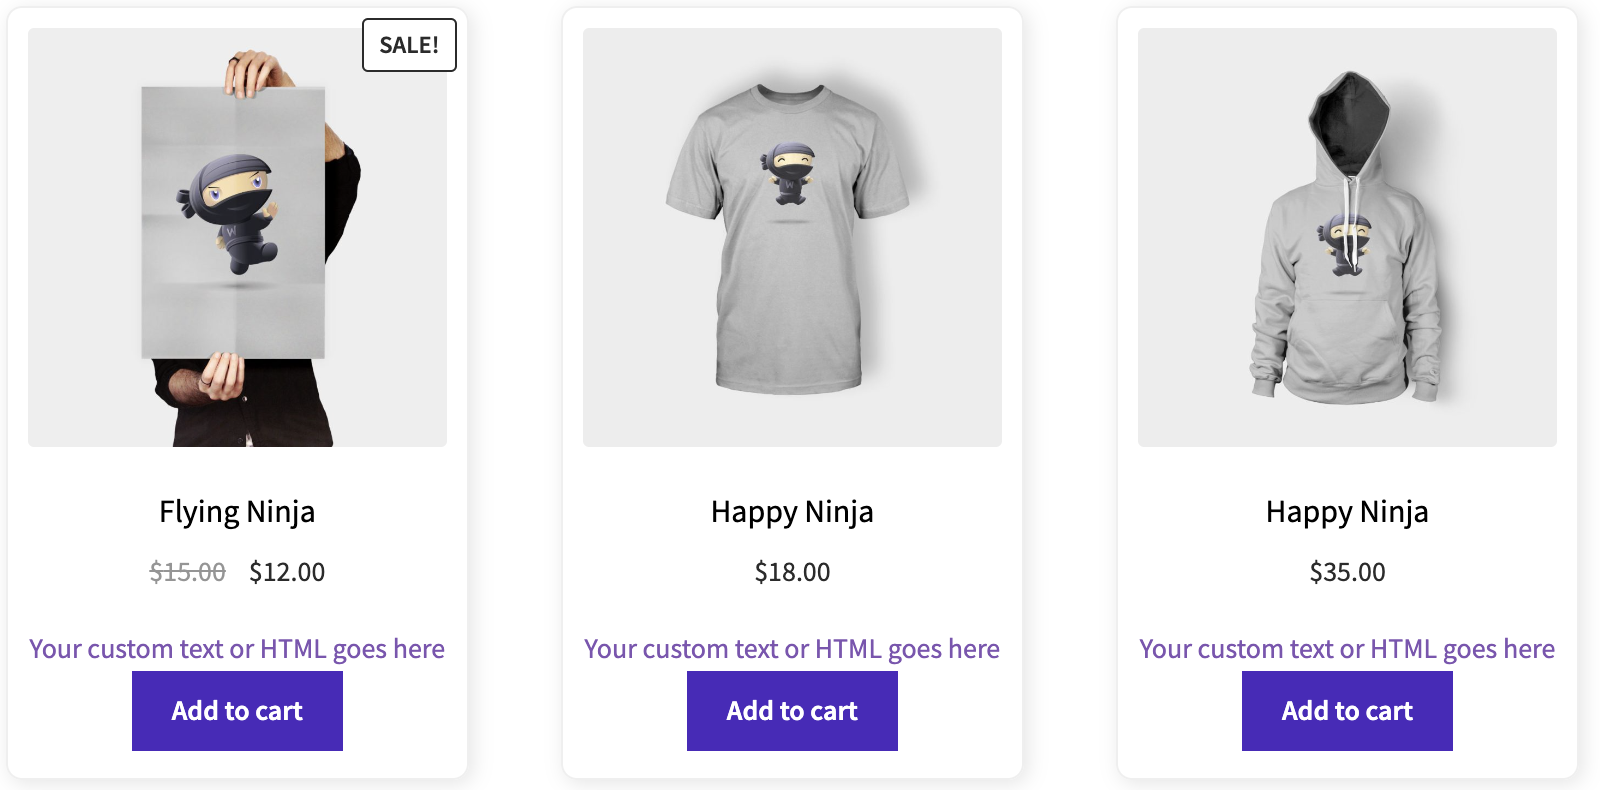 WooCommerce: Custom text on all product items